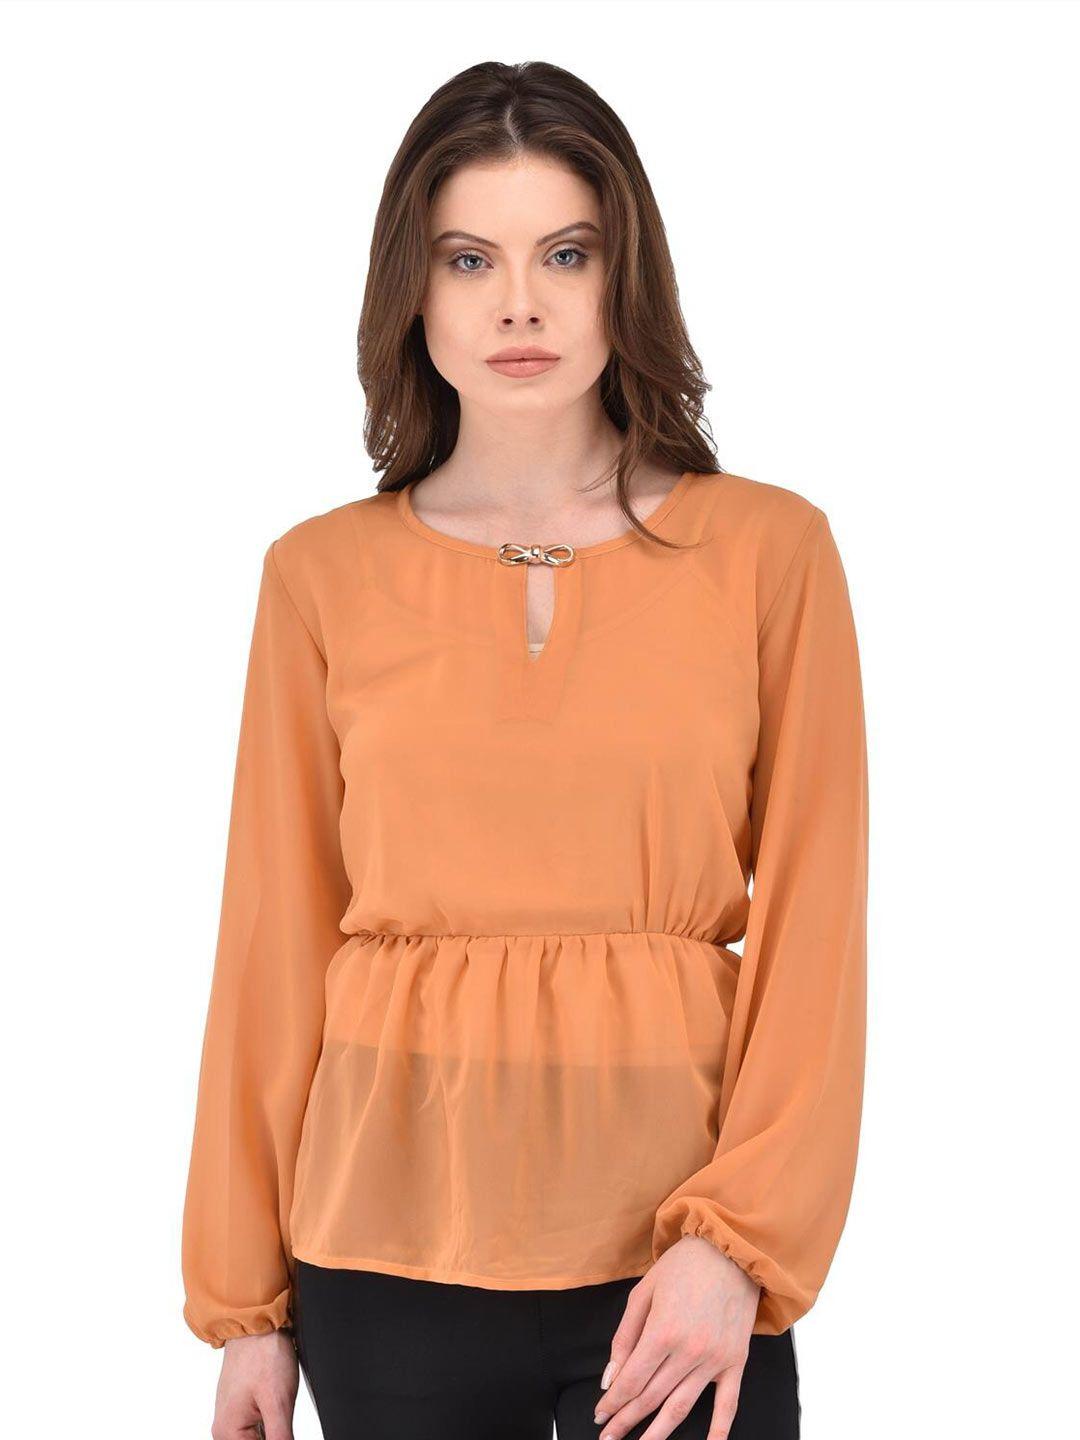 berrypeckers cuffed sleeves cinched waist top